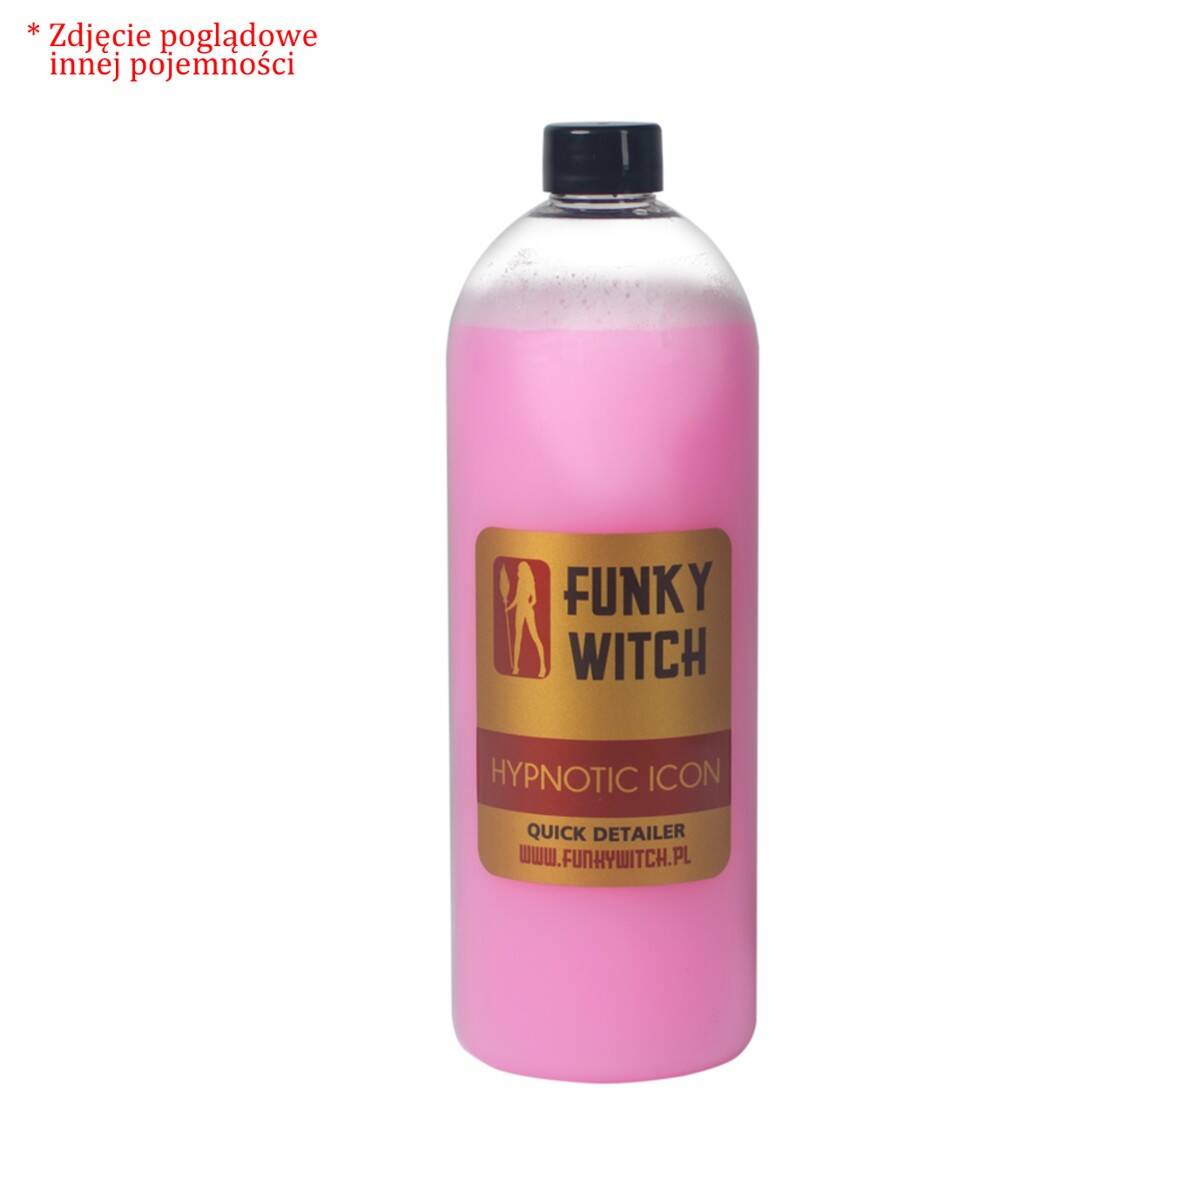 FUNKY WITCH Hypnotic Icon Quick Detailer 500ml Quick Detailer